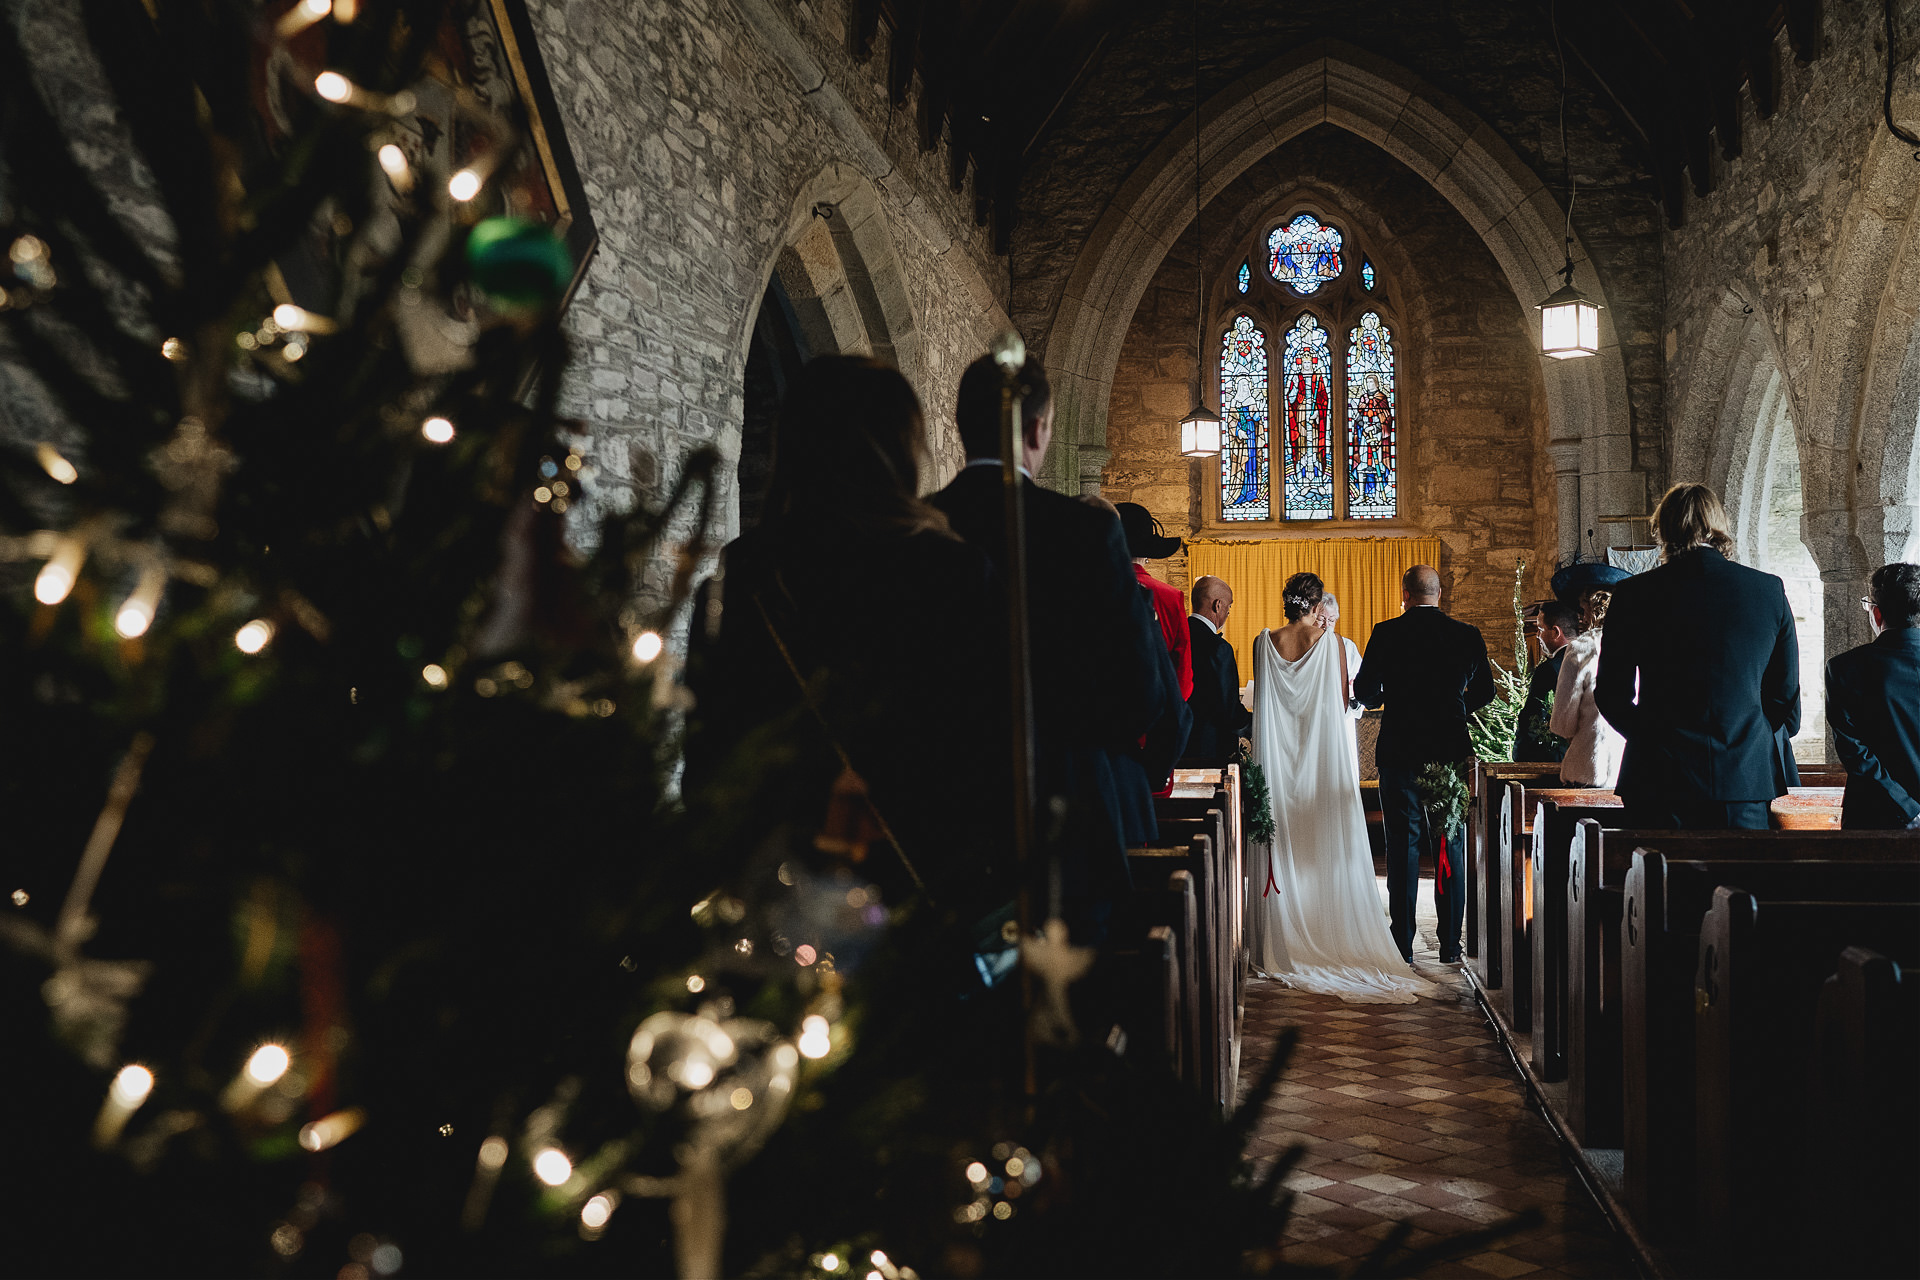 Bride and groom in a church with a Christmas tree